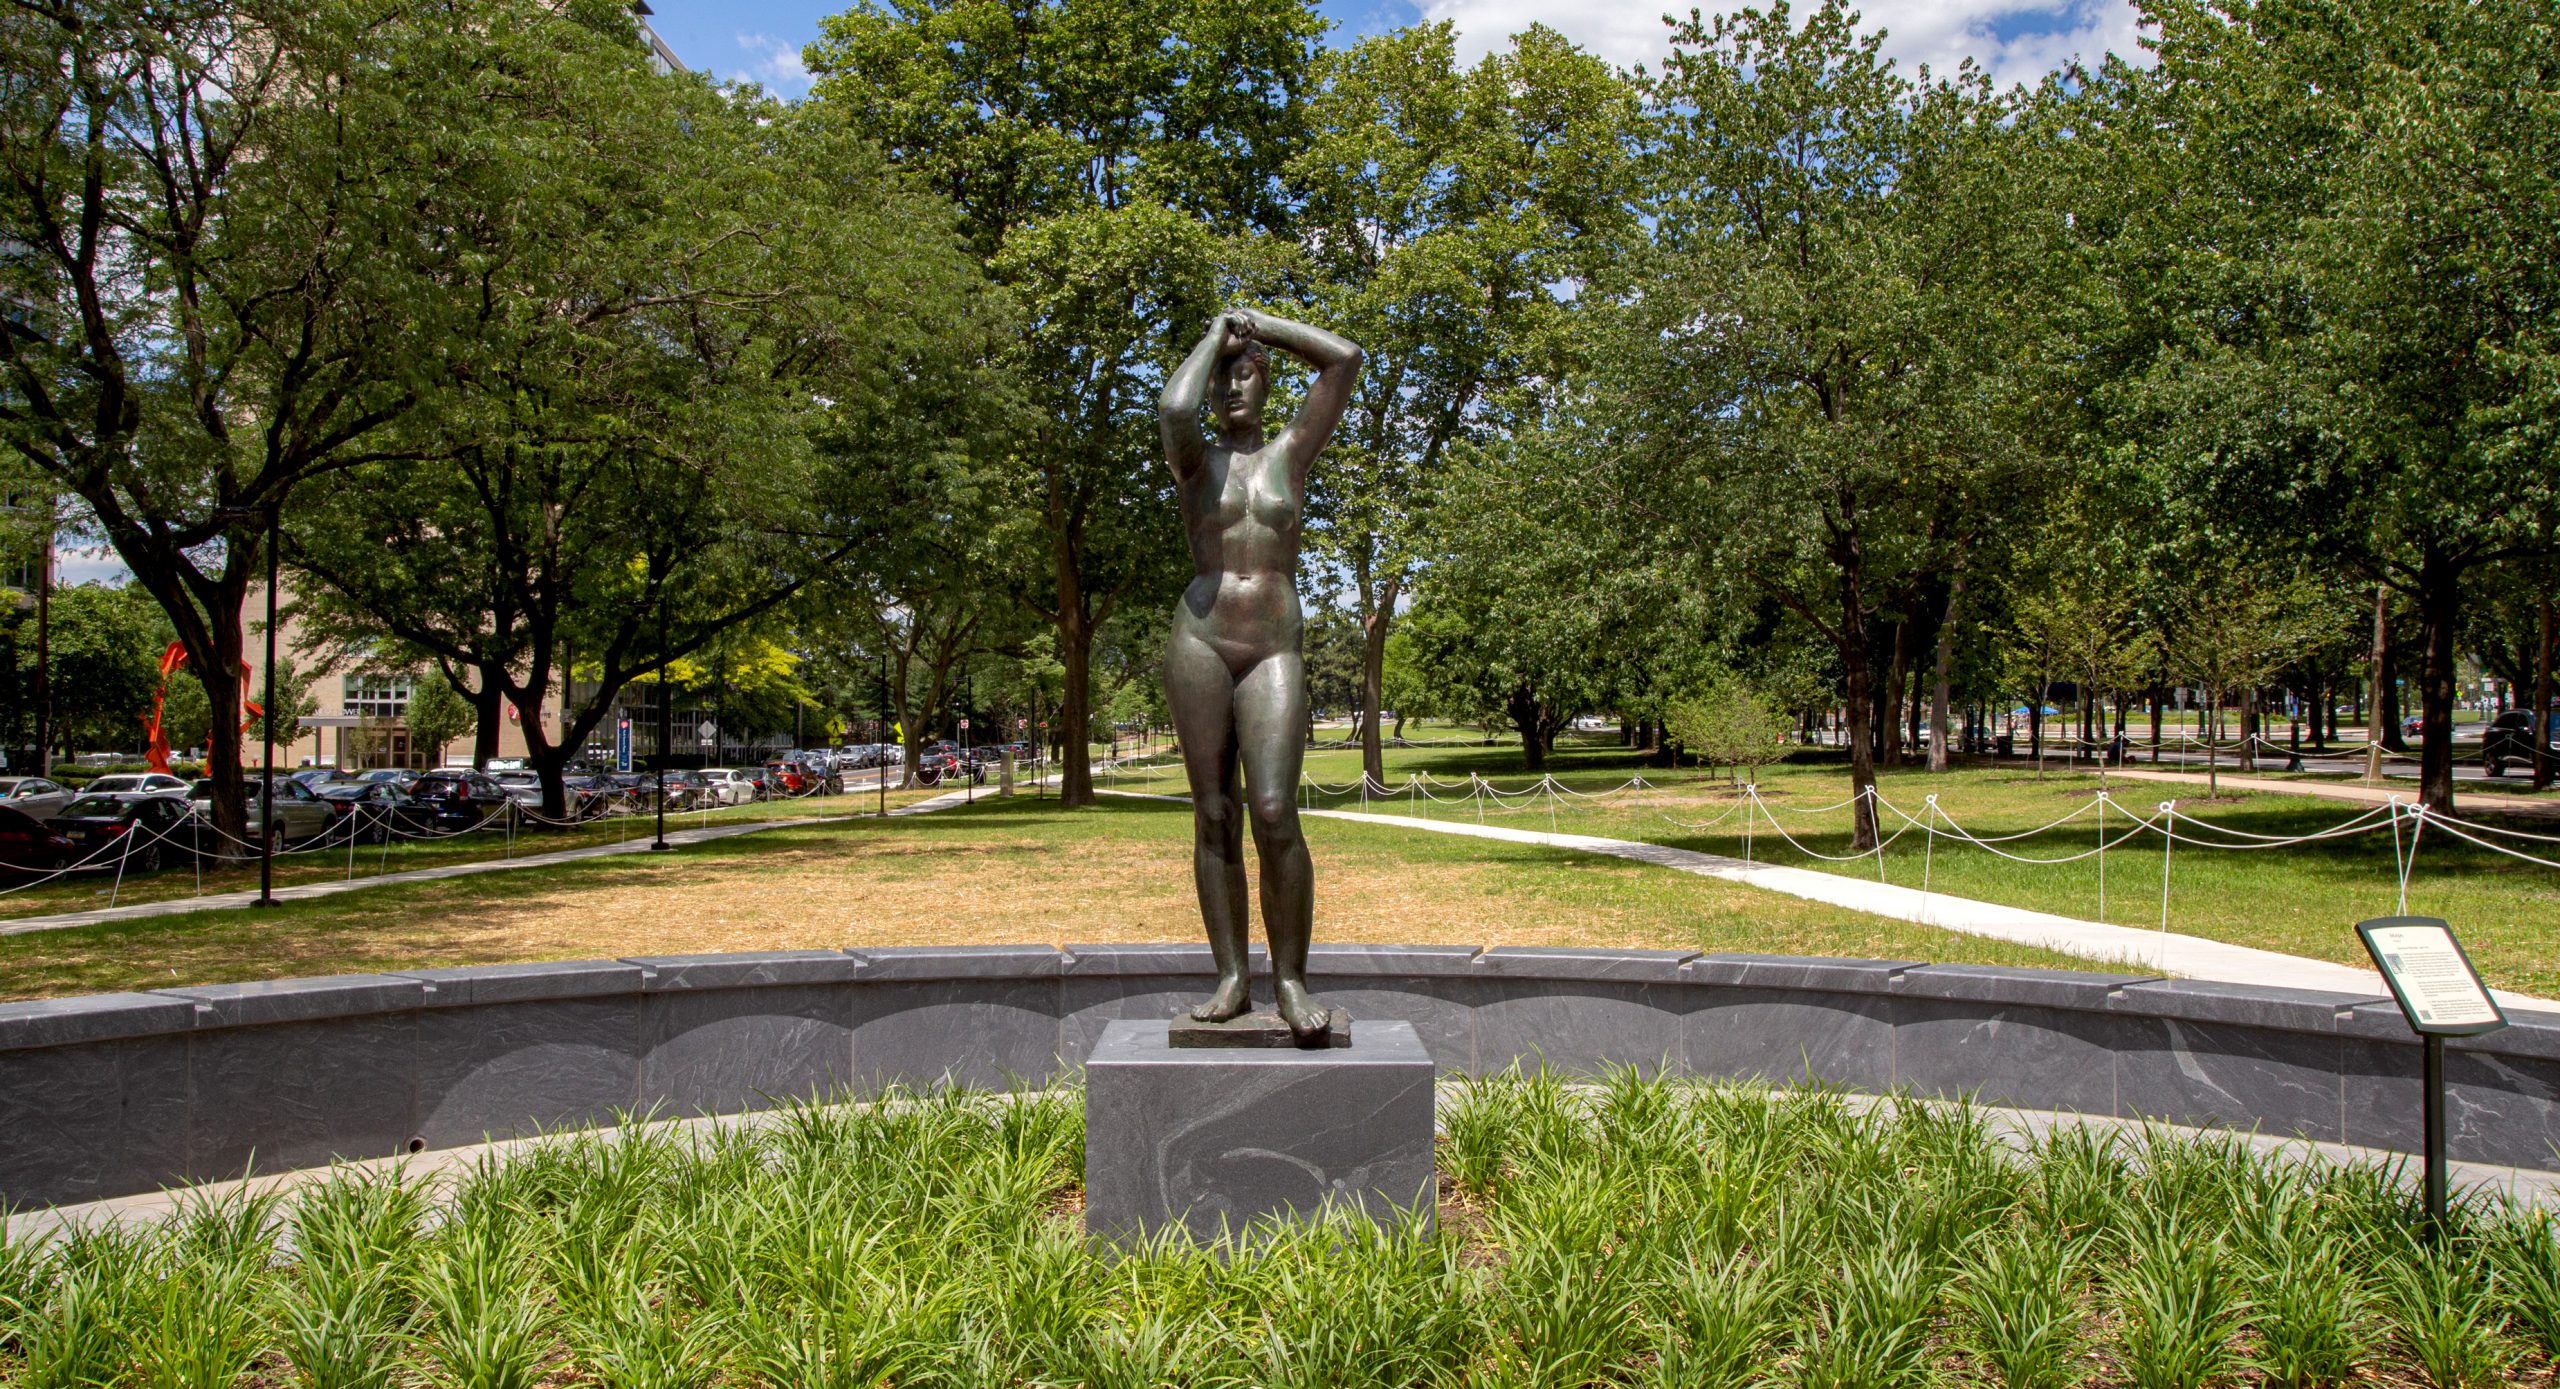 The Gerhard Marcks "Maja" sculpture – figurative bronze nude female with arms overhead – in the new "Maja Park" on the Parkway on a sunny June day. The sculpture stands tall on a gray granite base, surrounded by green Liriope plants.